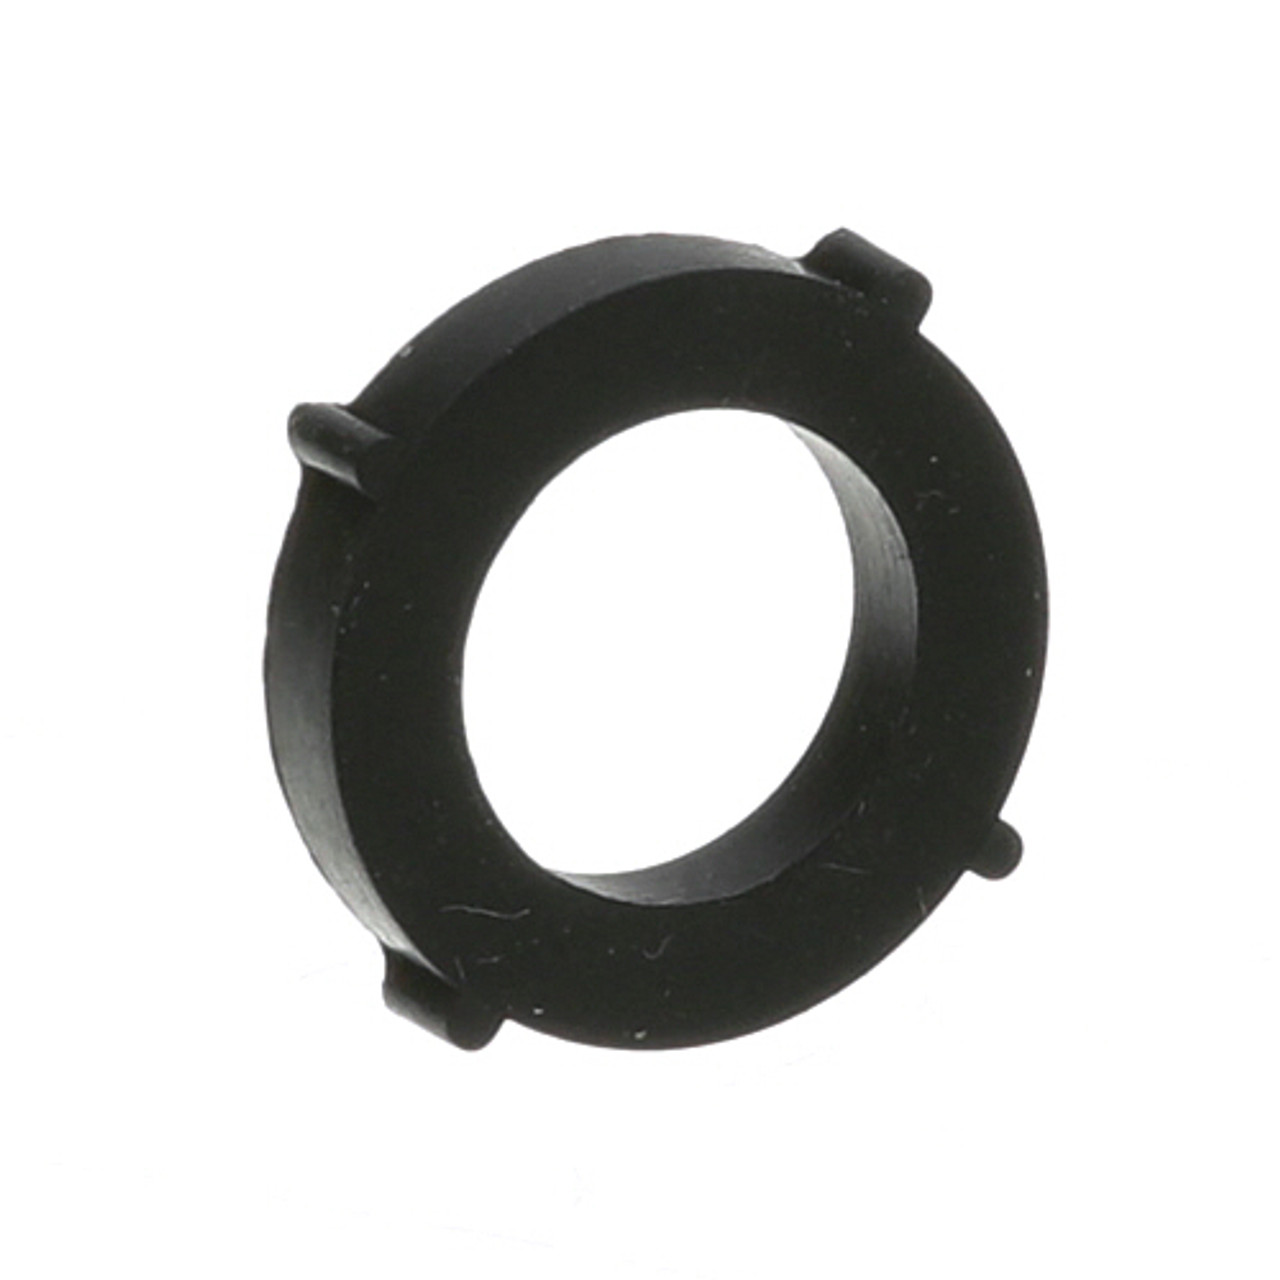 Shield Cap Washer - Replacement Part For Cecilware 522026